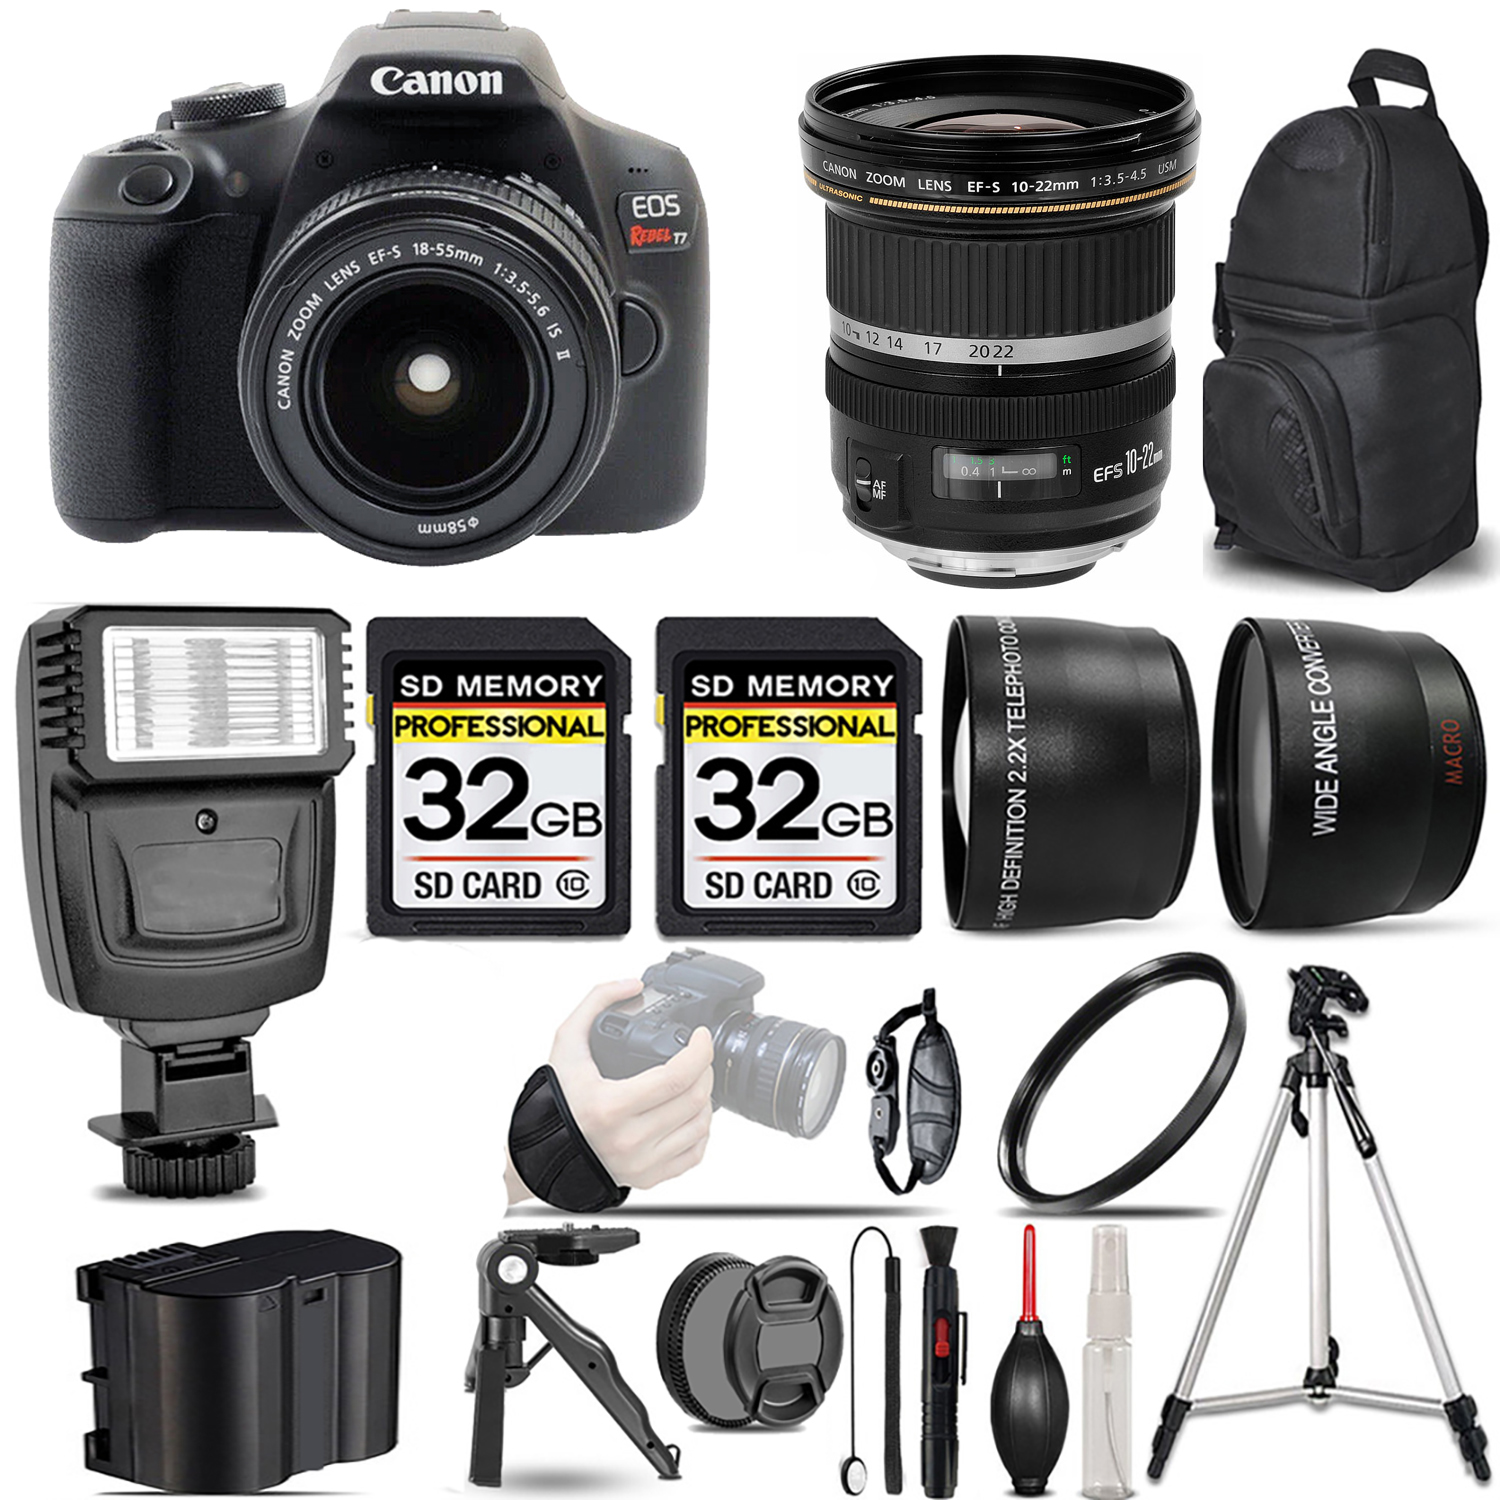 EOS Rebel T7 with 18-55mm Lens + 10-22mm f/3.5- 4.5 USM Lens + Flash + 64GB - Kit *FREE SHIPPING*